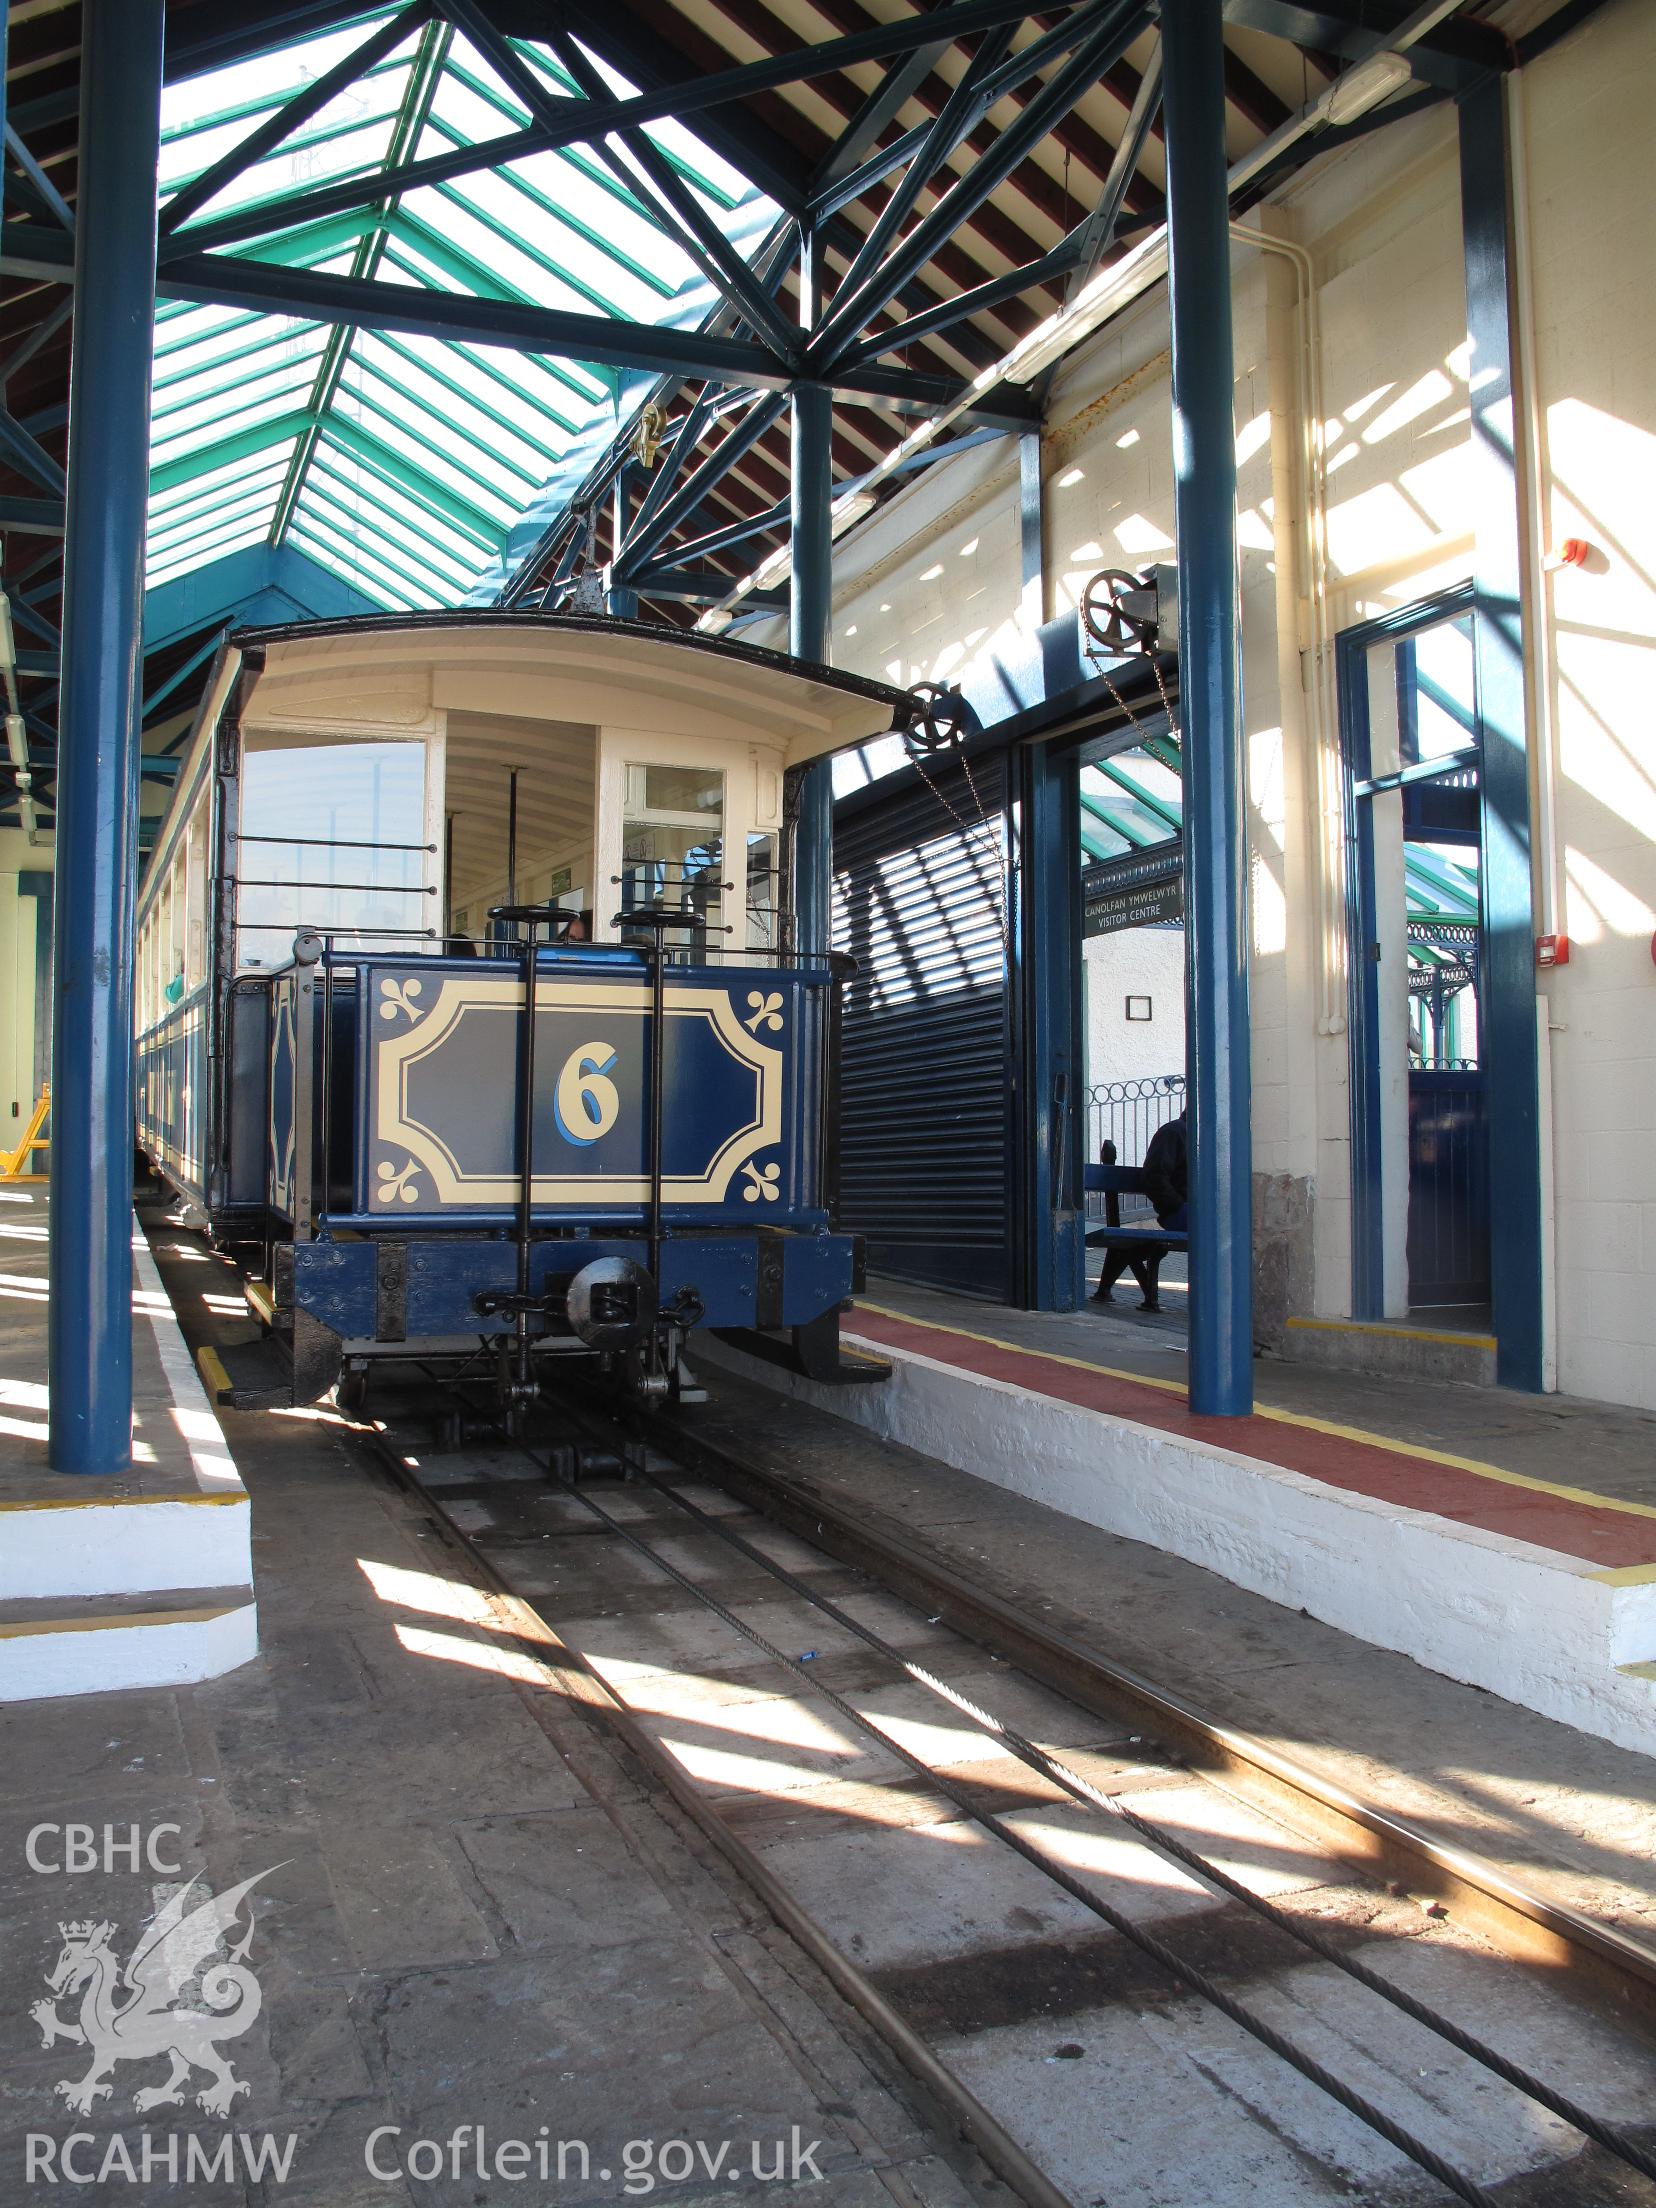 Interior view of the Summit Station, Great Orme Tramway, Llandudno, taken by Brian Malaws on 23 July 2011.